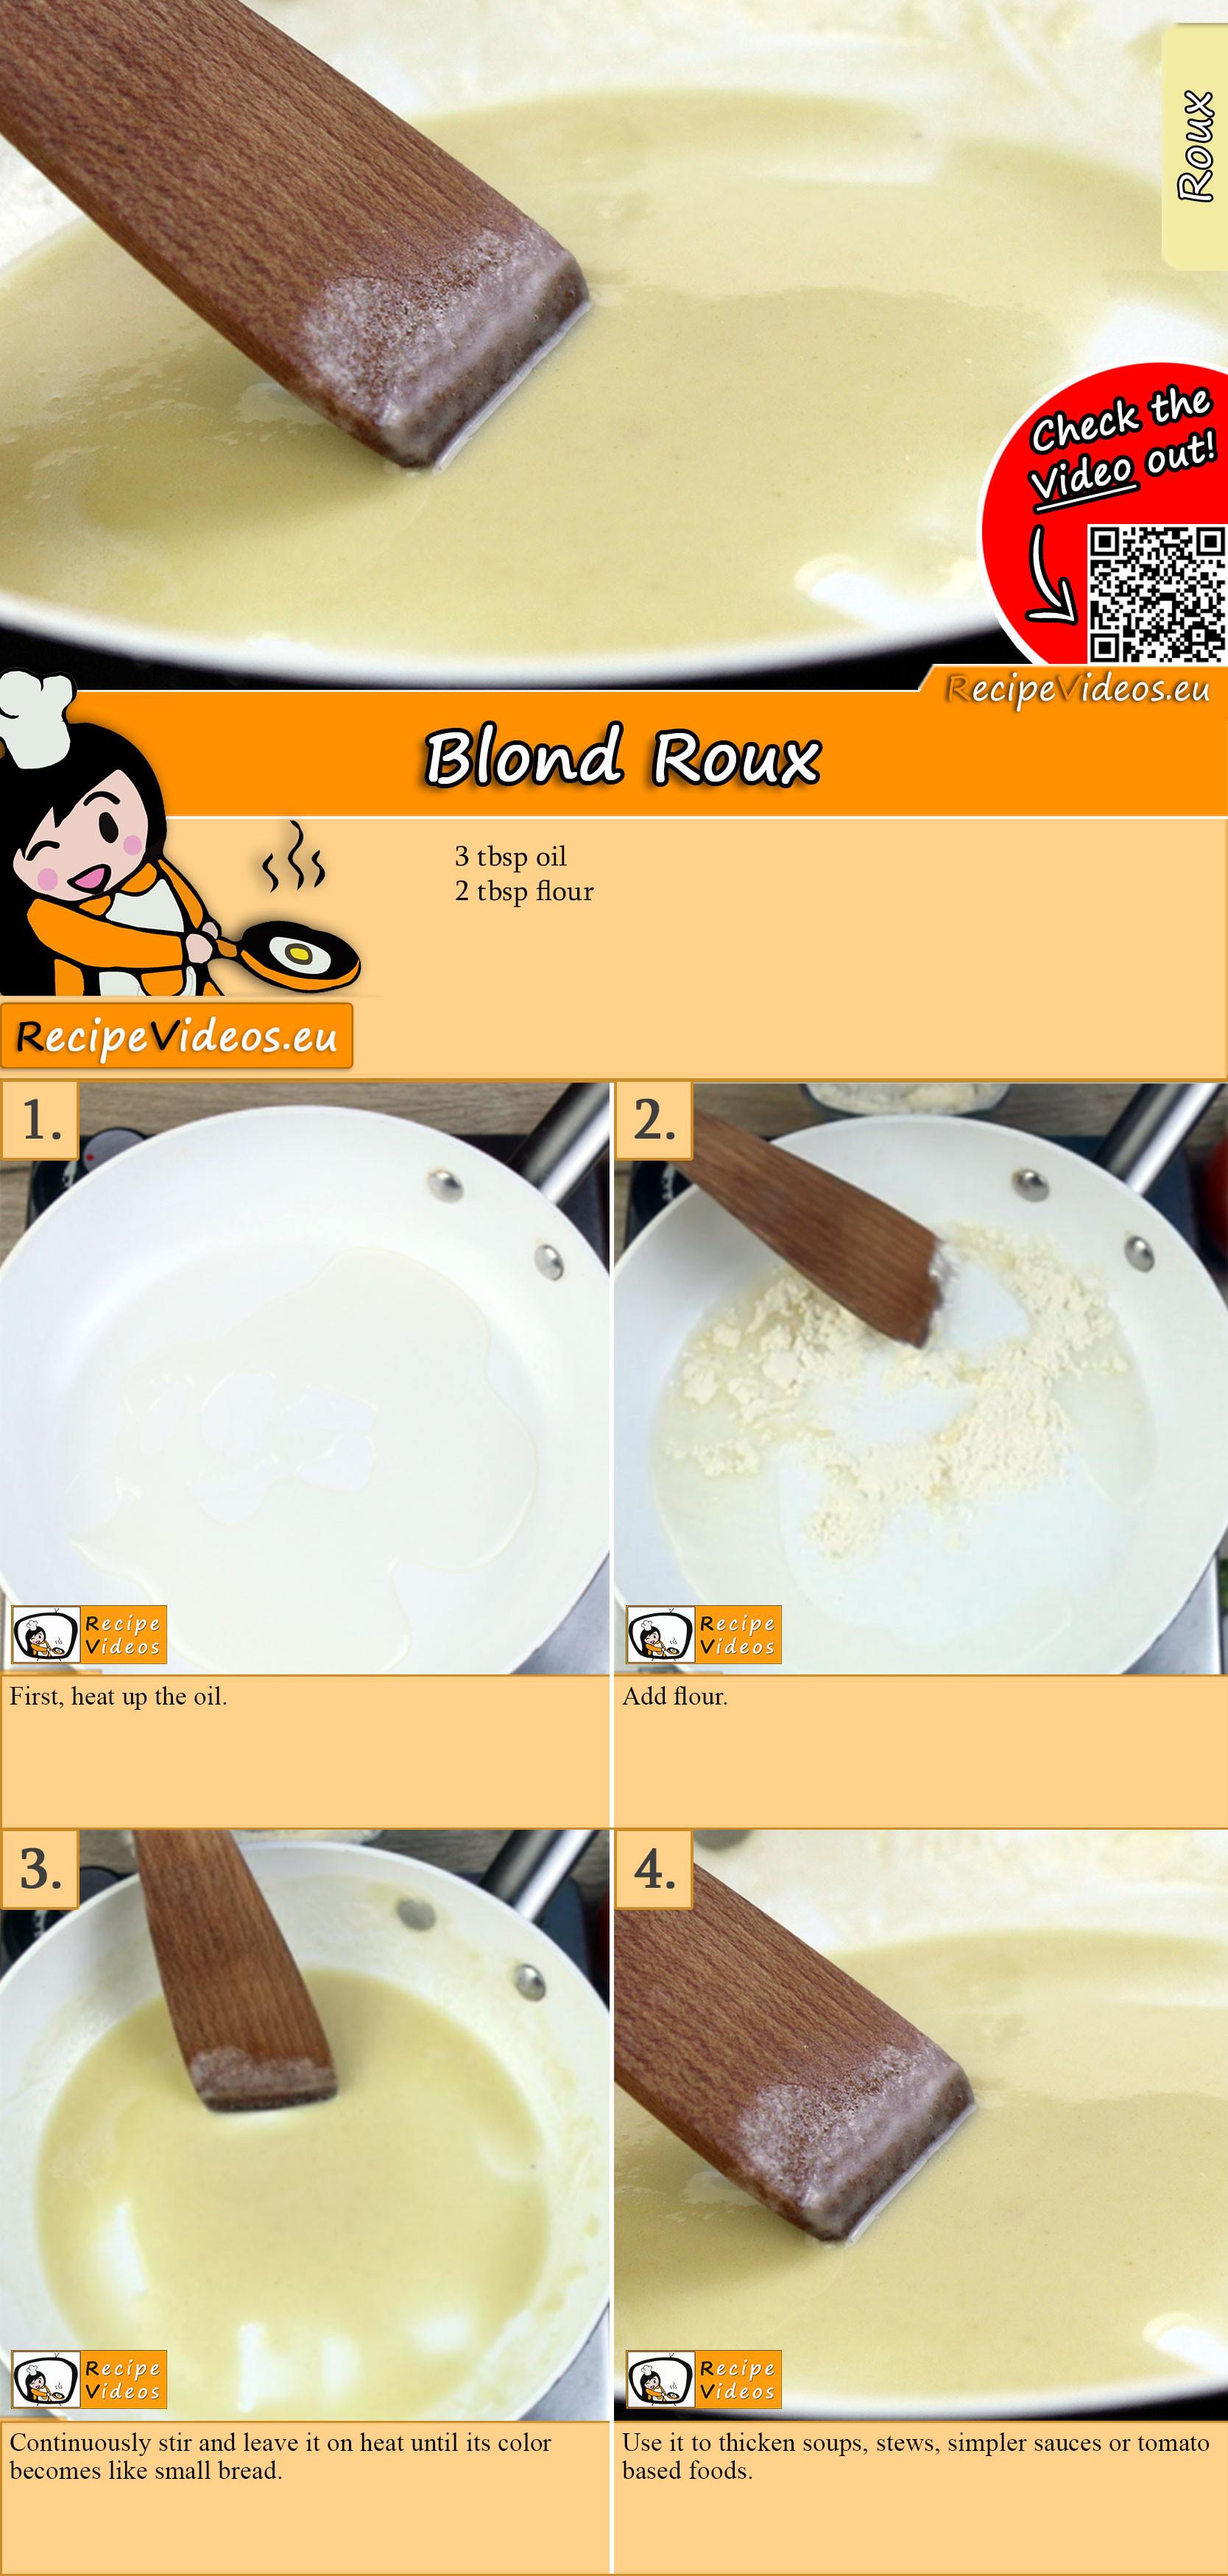 Blond Roux recipe with video